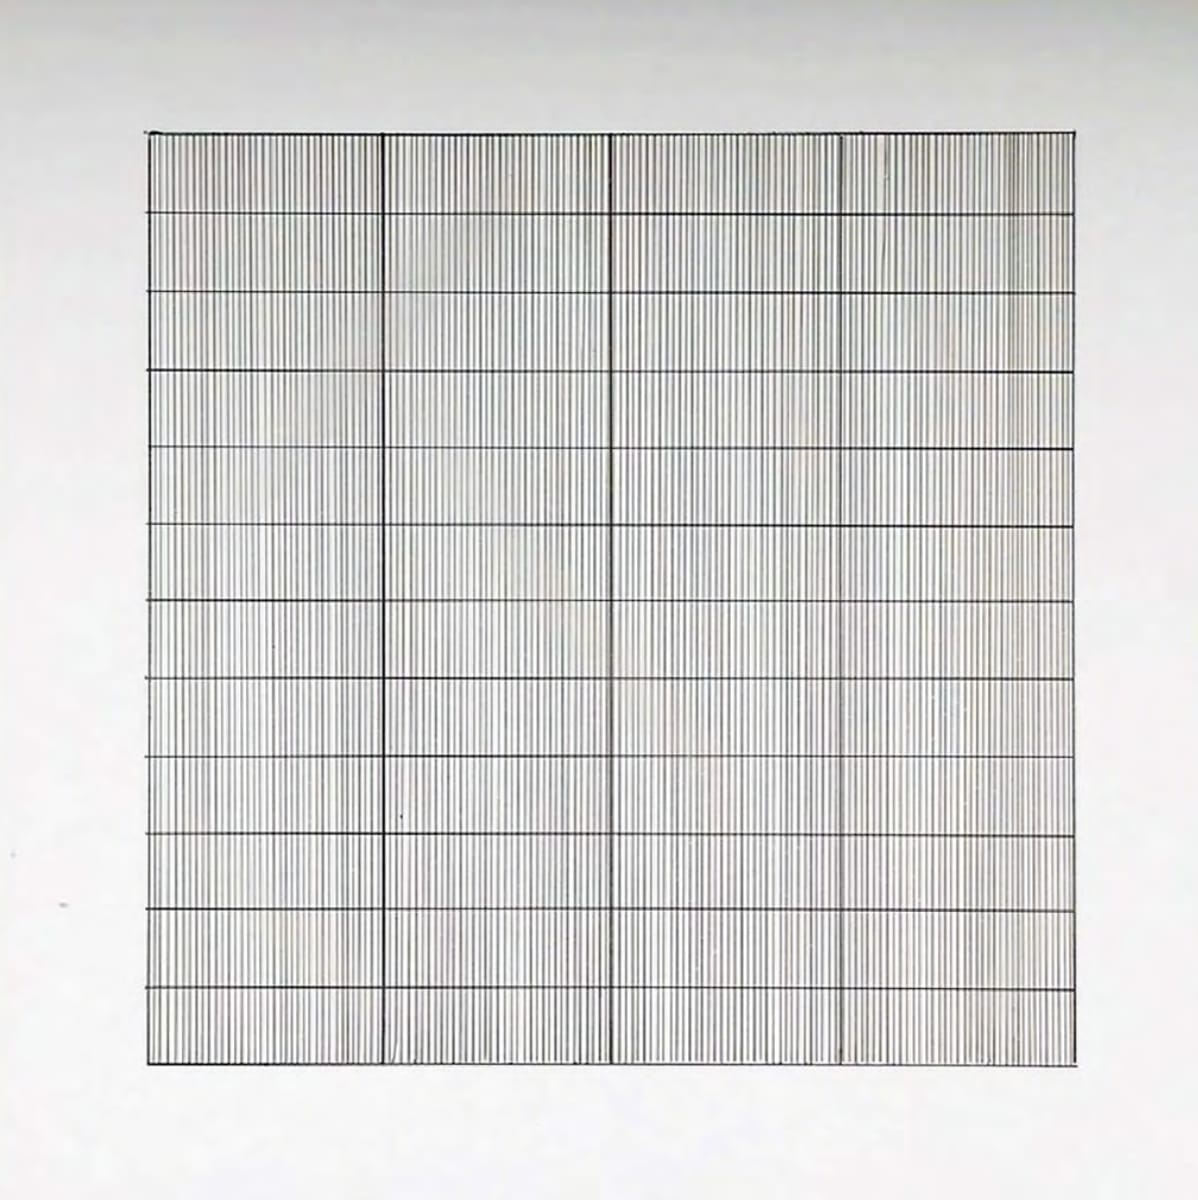 Untitled by Agnes Martin  Image: Agnes Martin, Untitled, Lithograph, 13.75 x 13.75 x 1", 13.75 x 13.75 x 1", 1990. Courtesy of NMSU Permanent Art Collection.